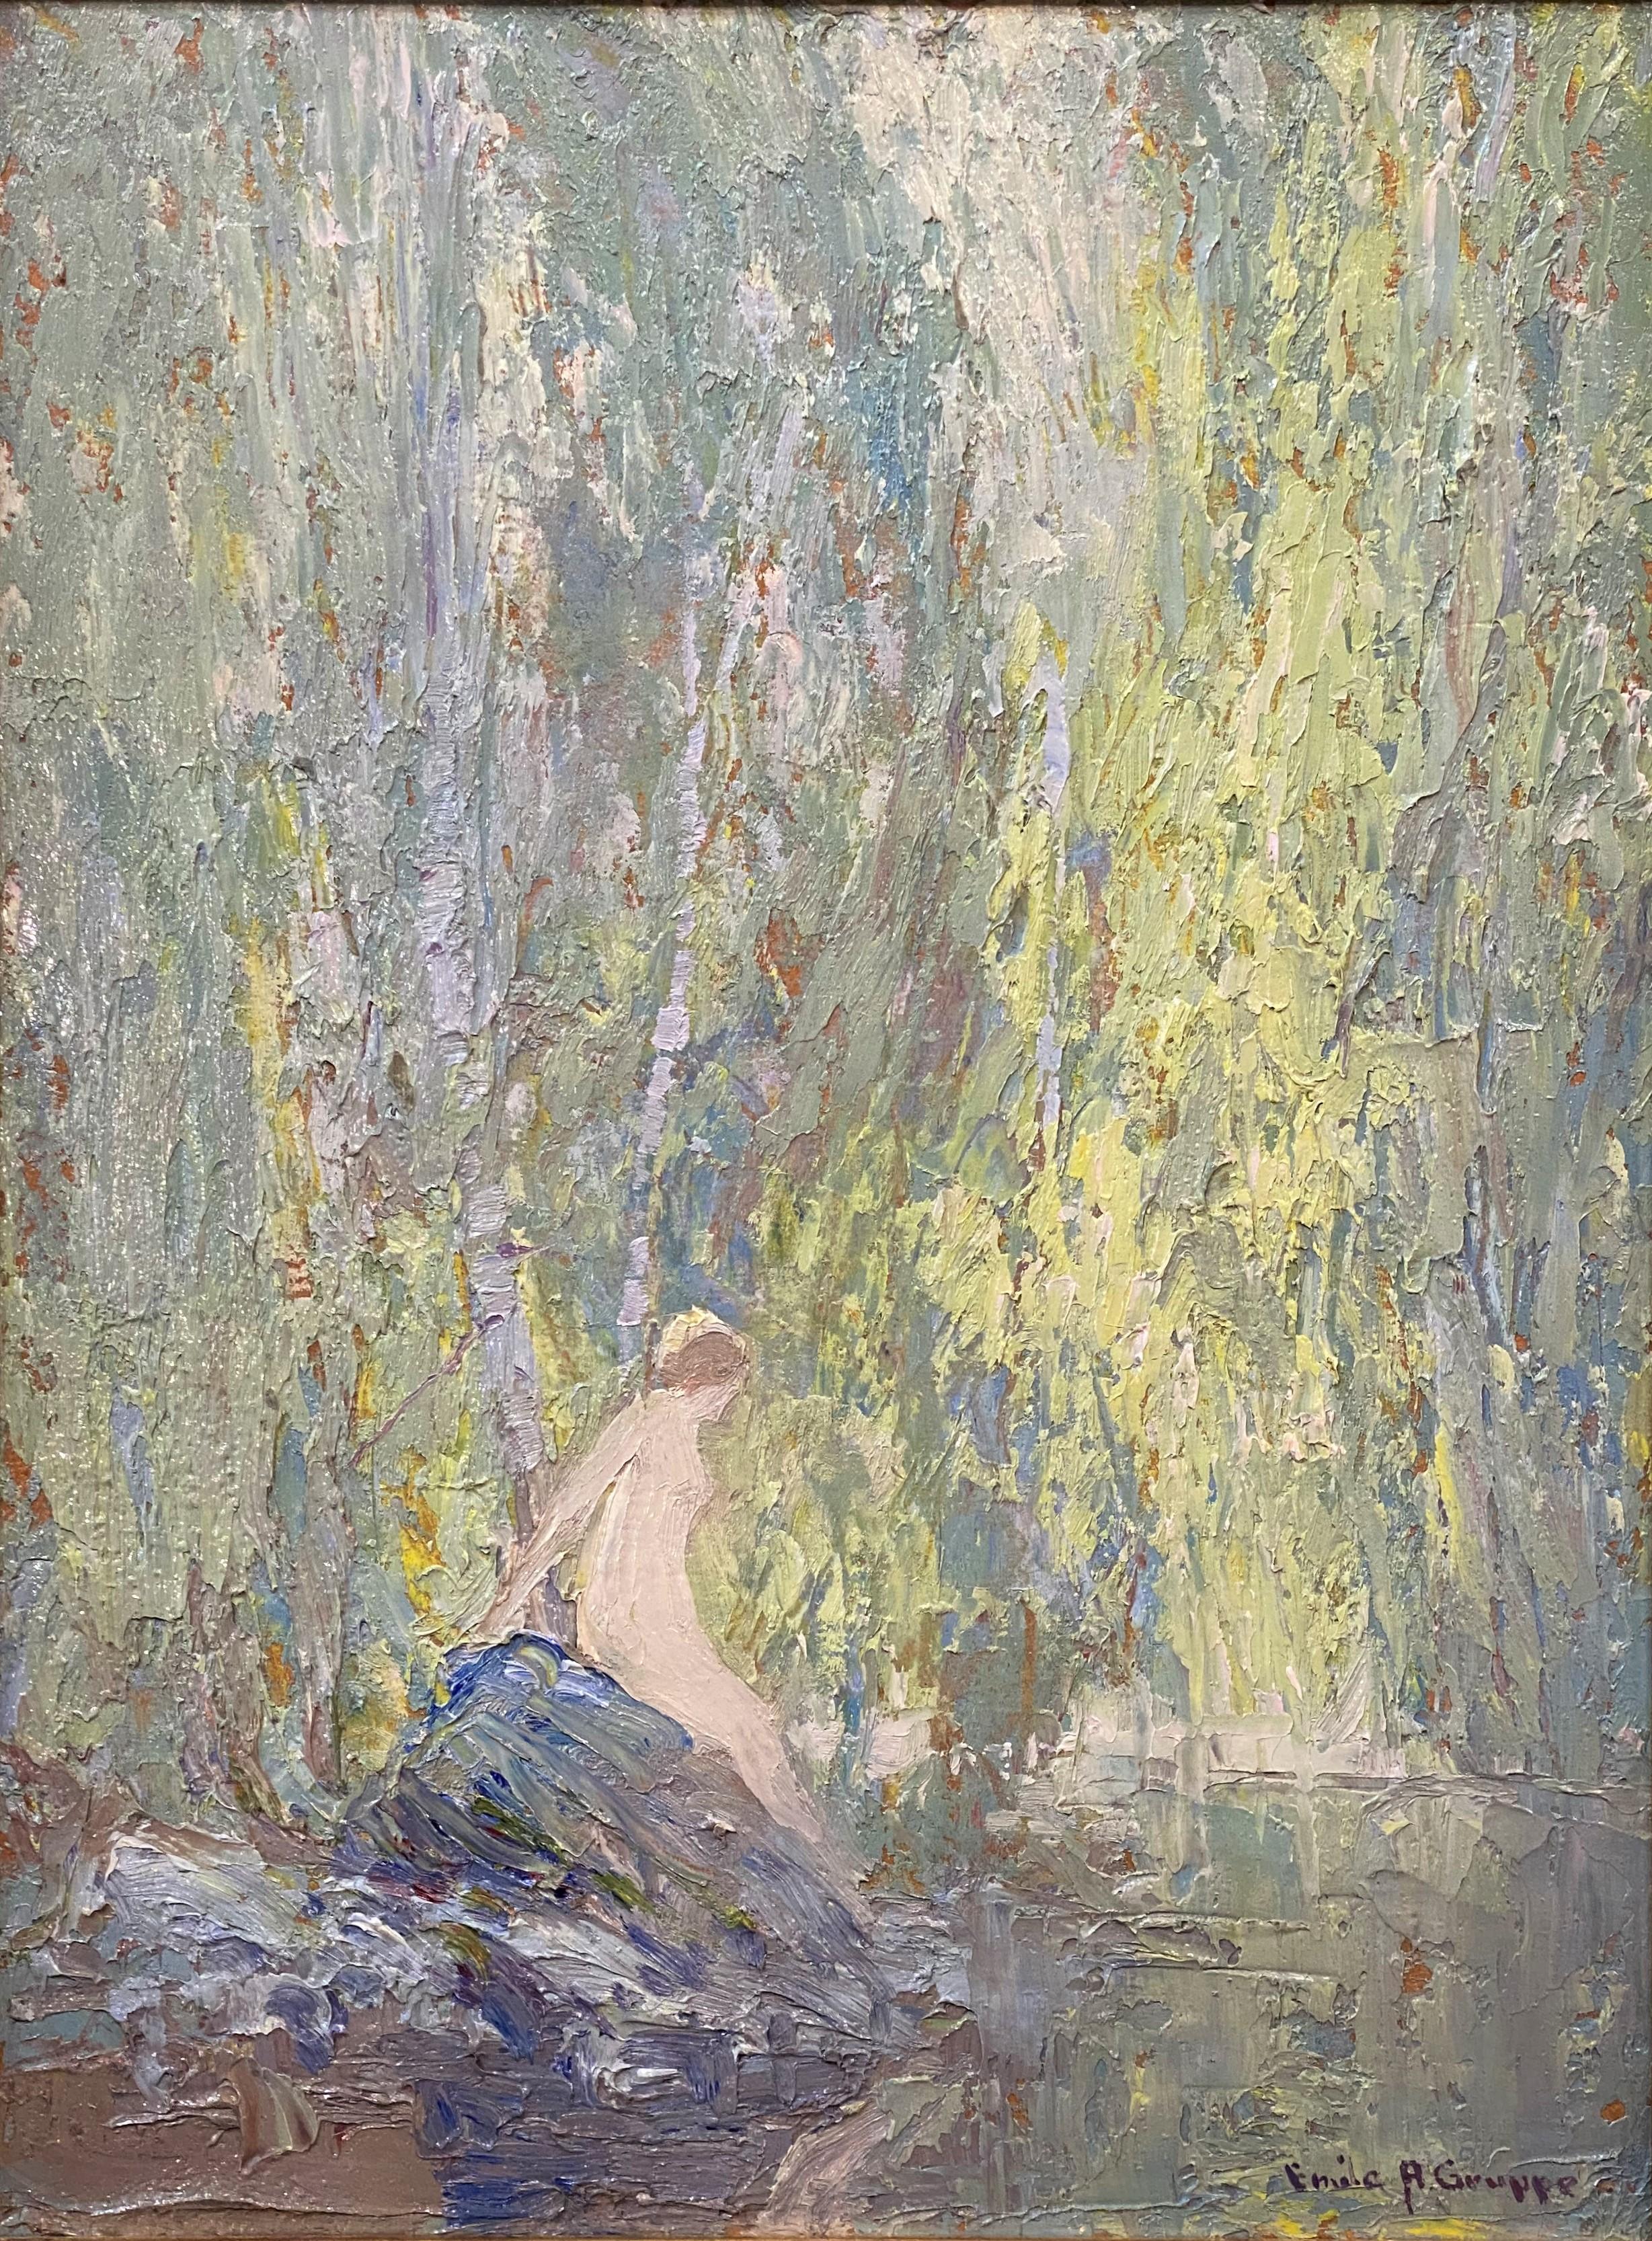 Bather - Painting by Emile Albert Gruppe